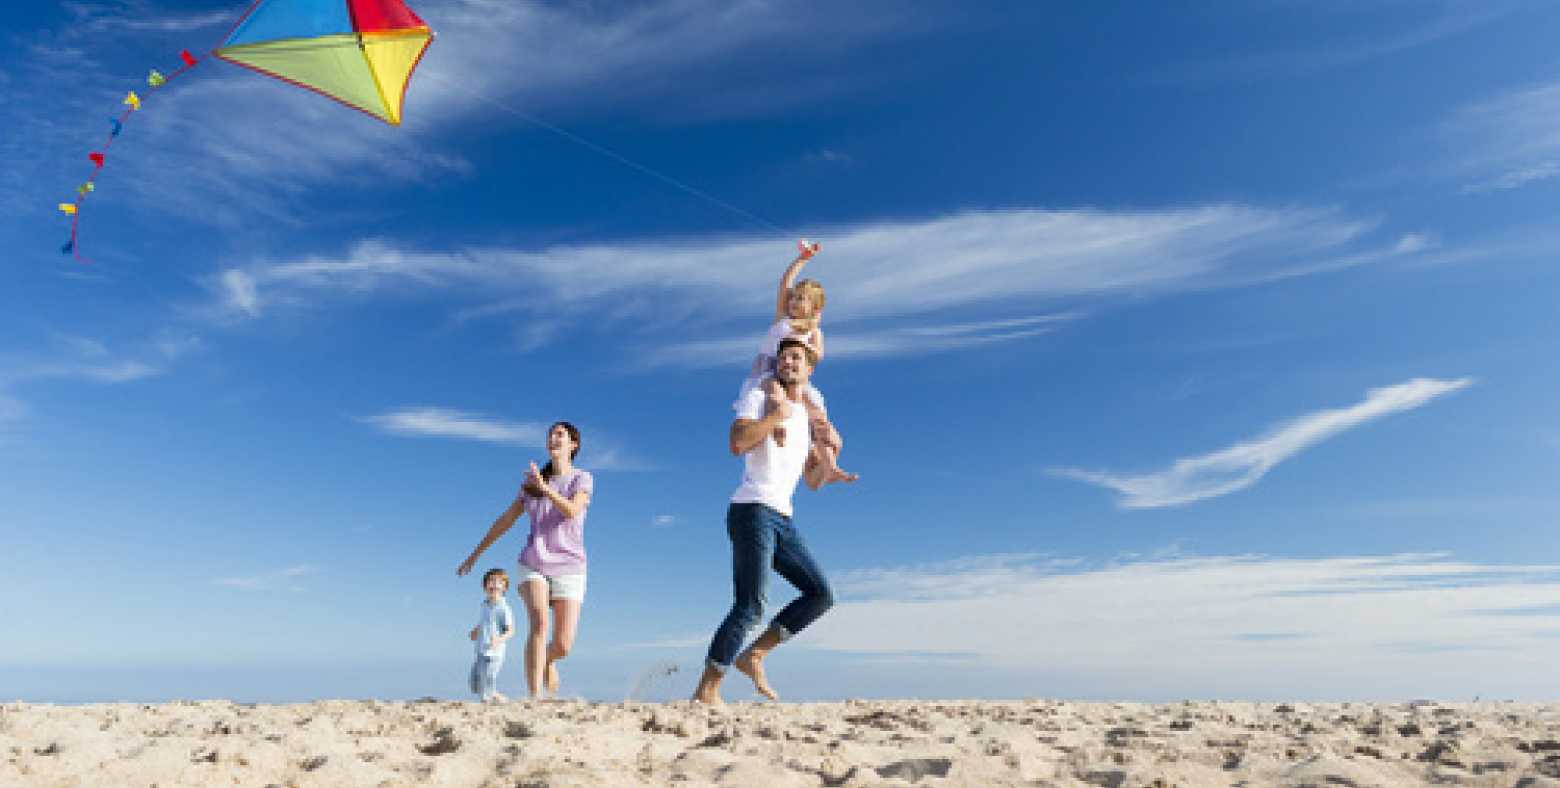 Family playing with a kite on the beach